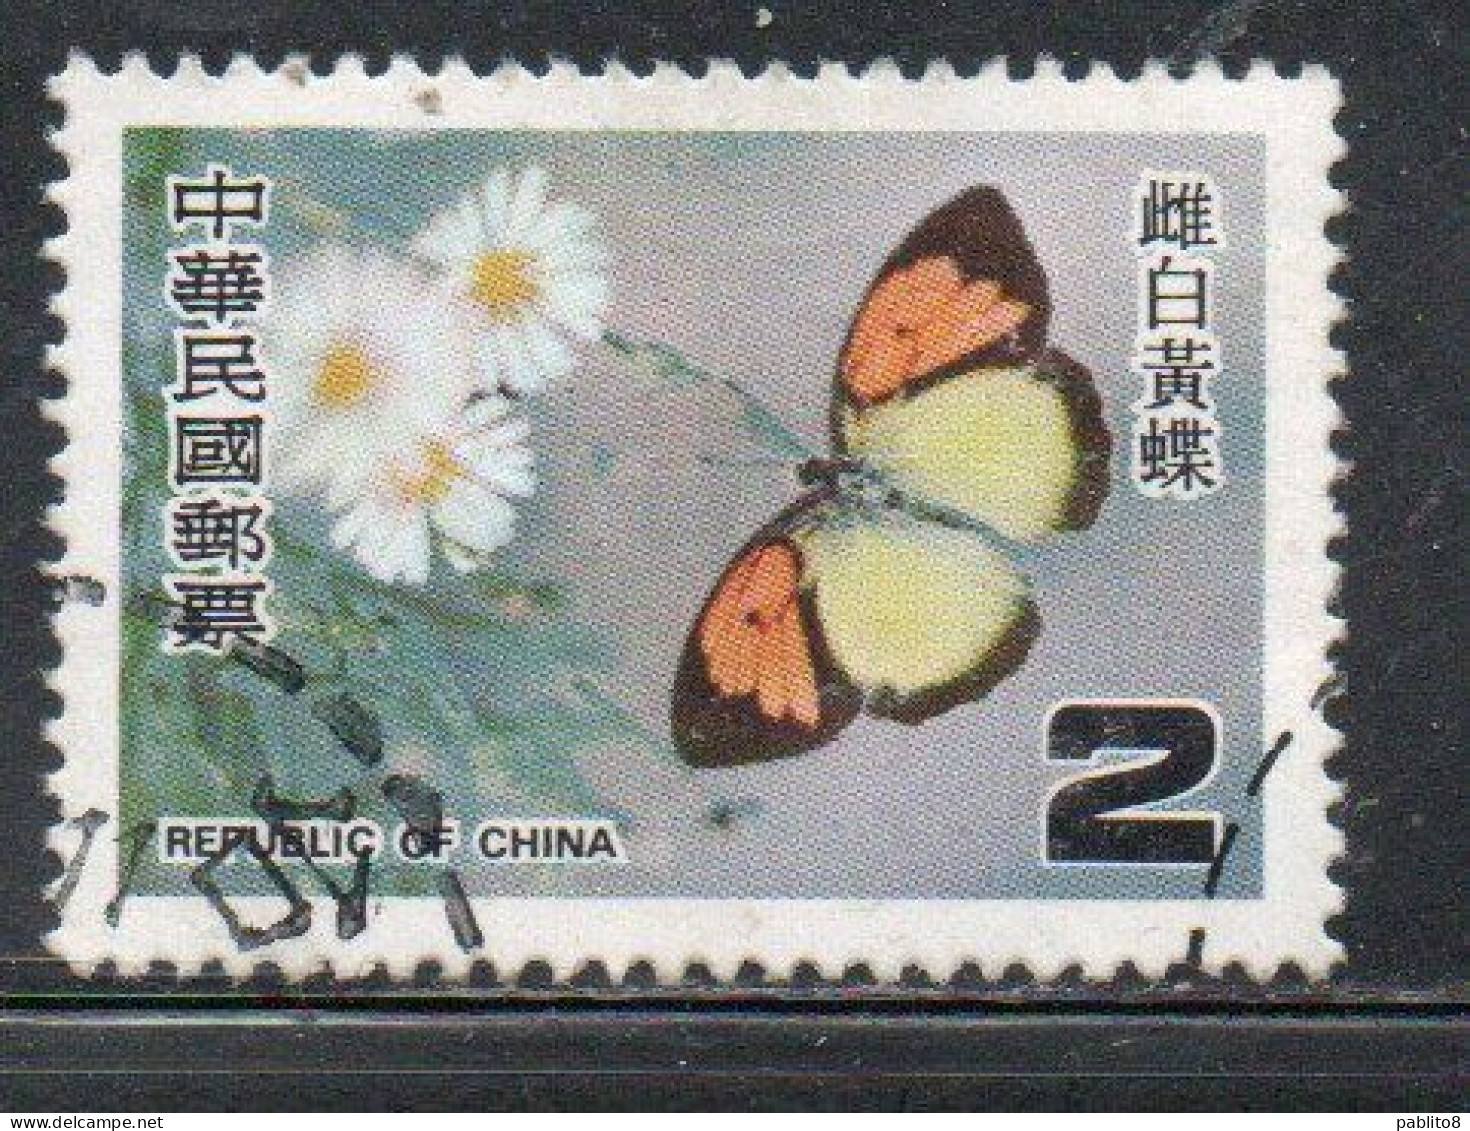 CHINA REPUBLIC CINA TAIWAN FORMOSA 1978 PROTECTED BUTTERFLIES IXIAS PYRENE BUTTERFLY 2$ USED USATO OBLITERE' - Usados